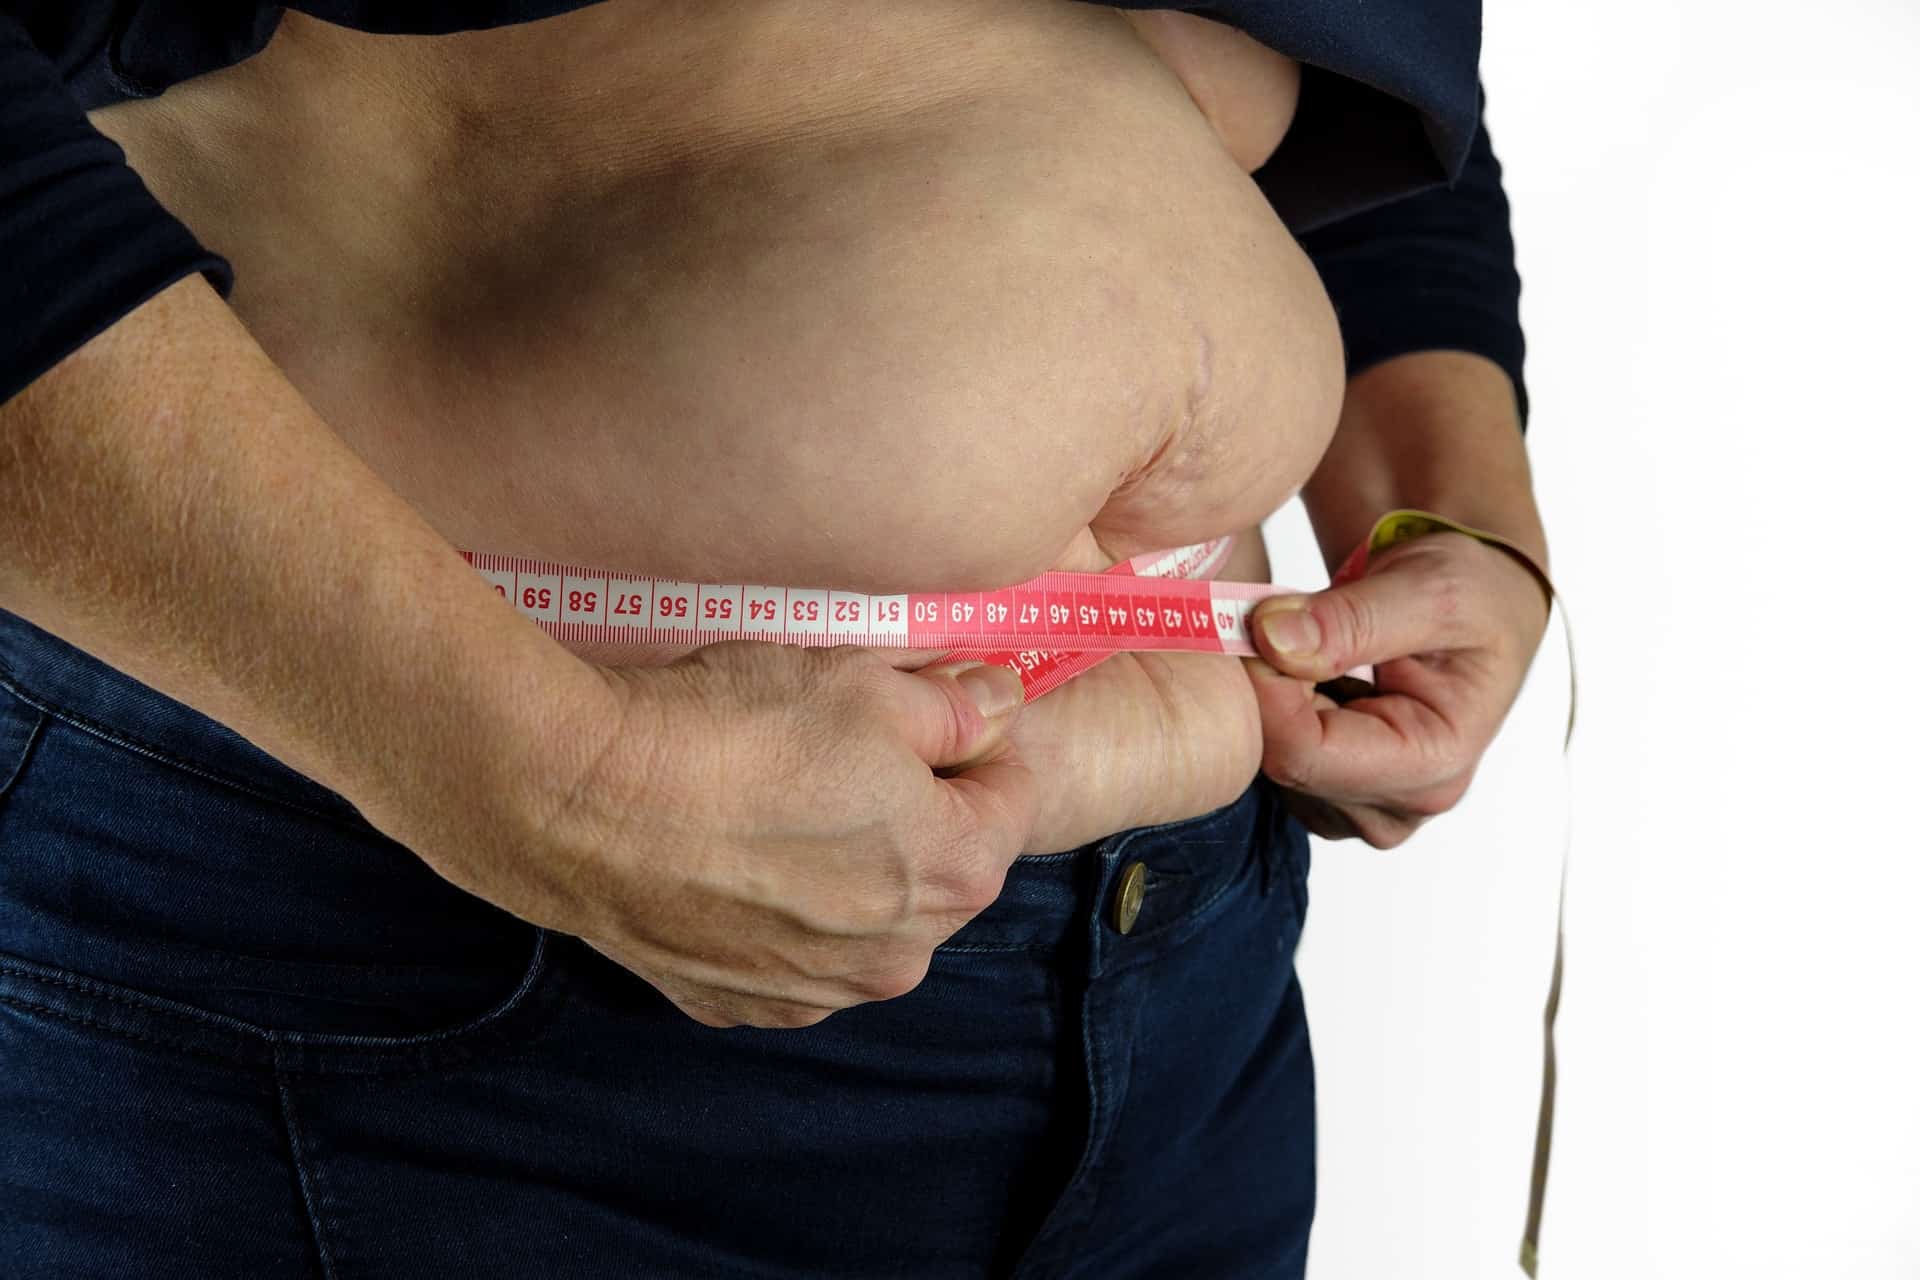 A Man Measuring Their Belly With a Tape Measure